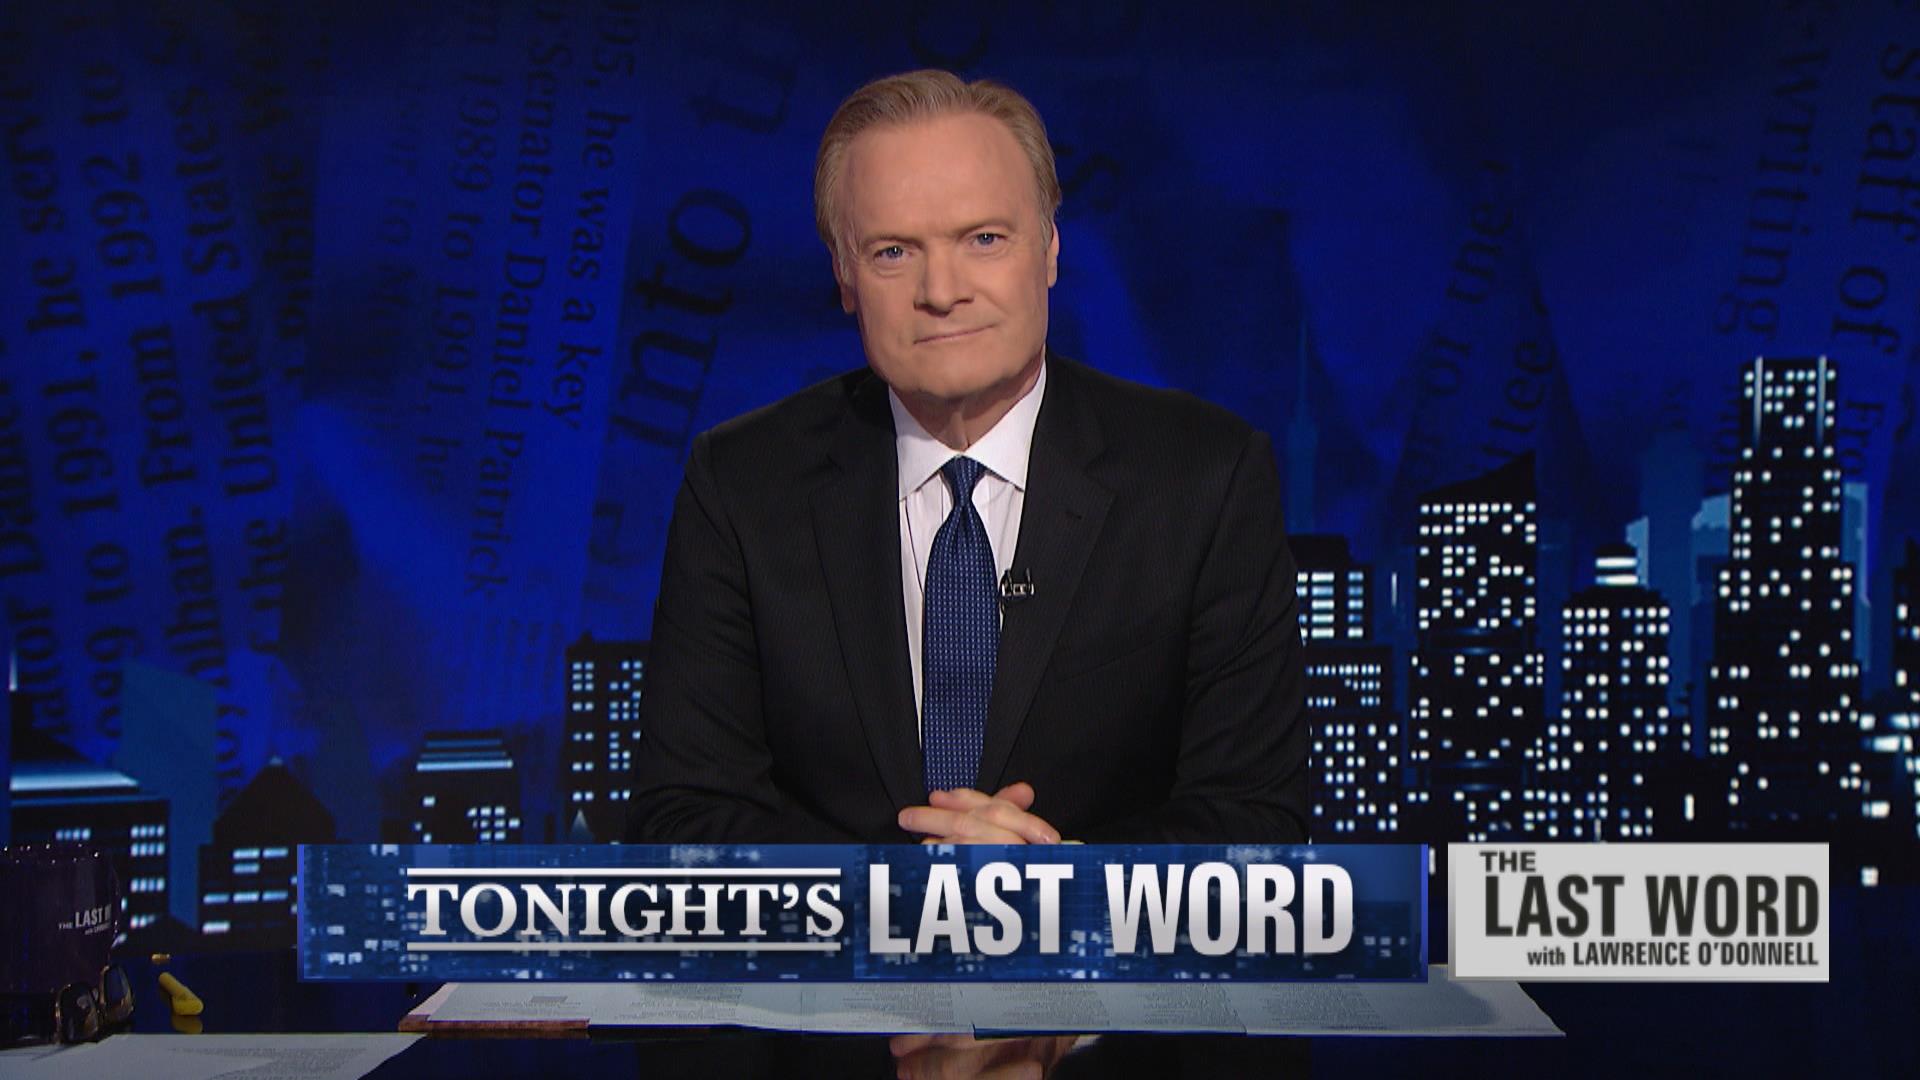 Lawrence O'Donnell on Last Word on MSNBC